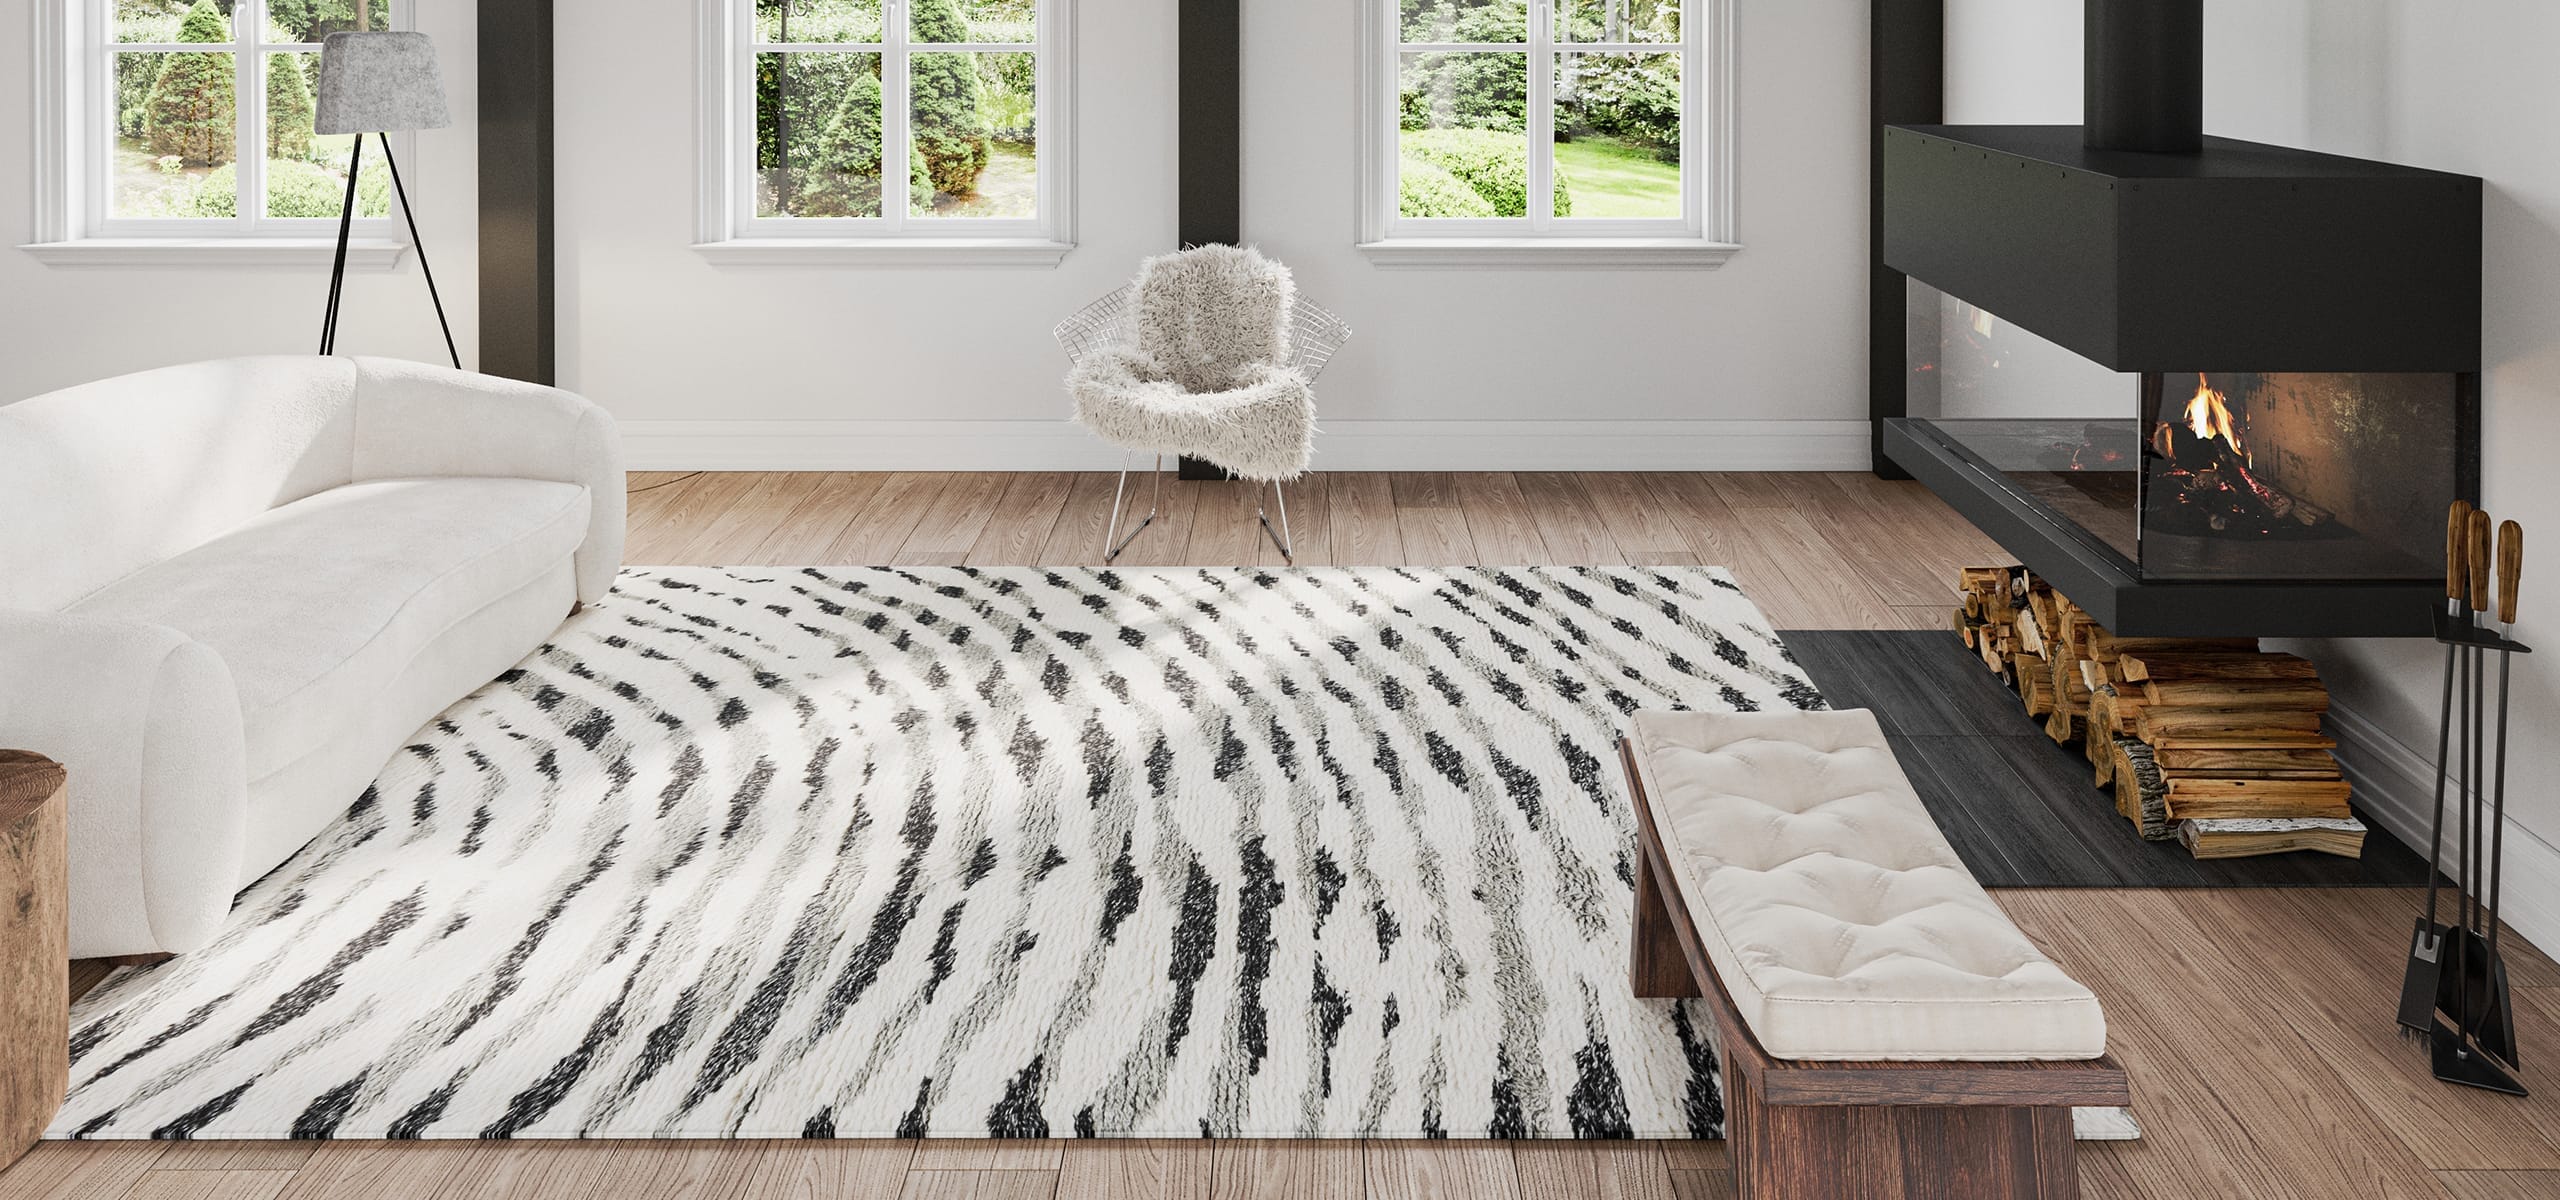 How to Choose the Right Area Rug to Tie Your Room Together - Real Wood  Floors